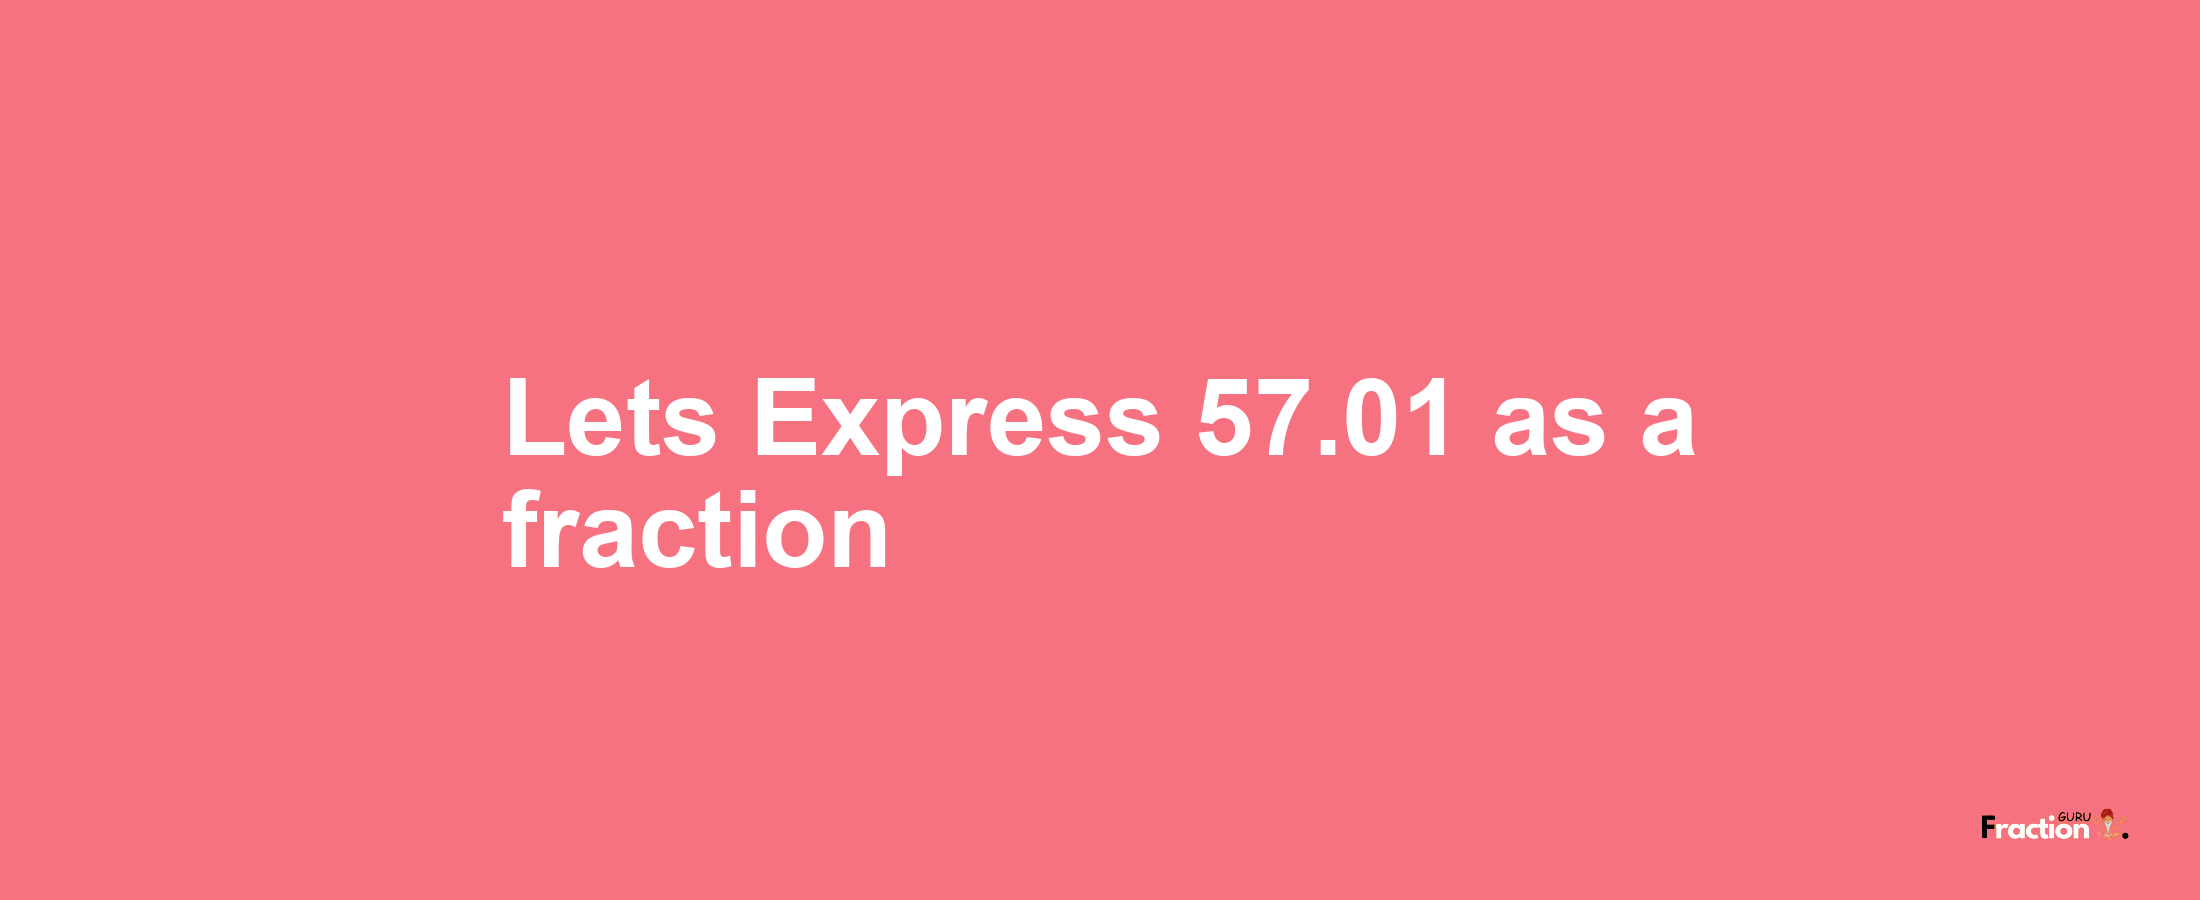 Lets Express 57.01 as afraction